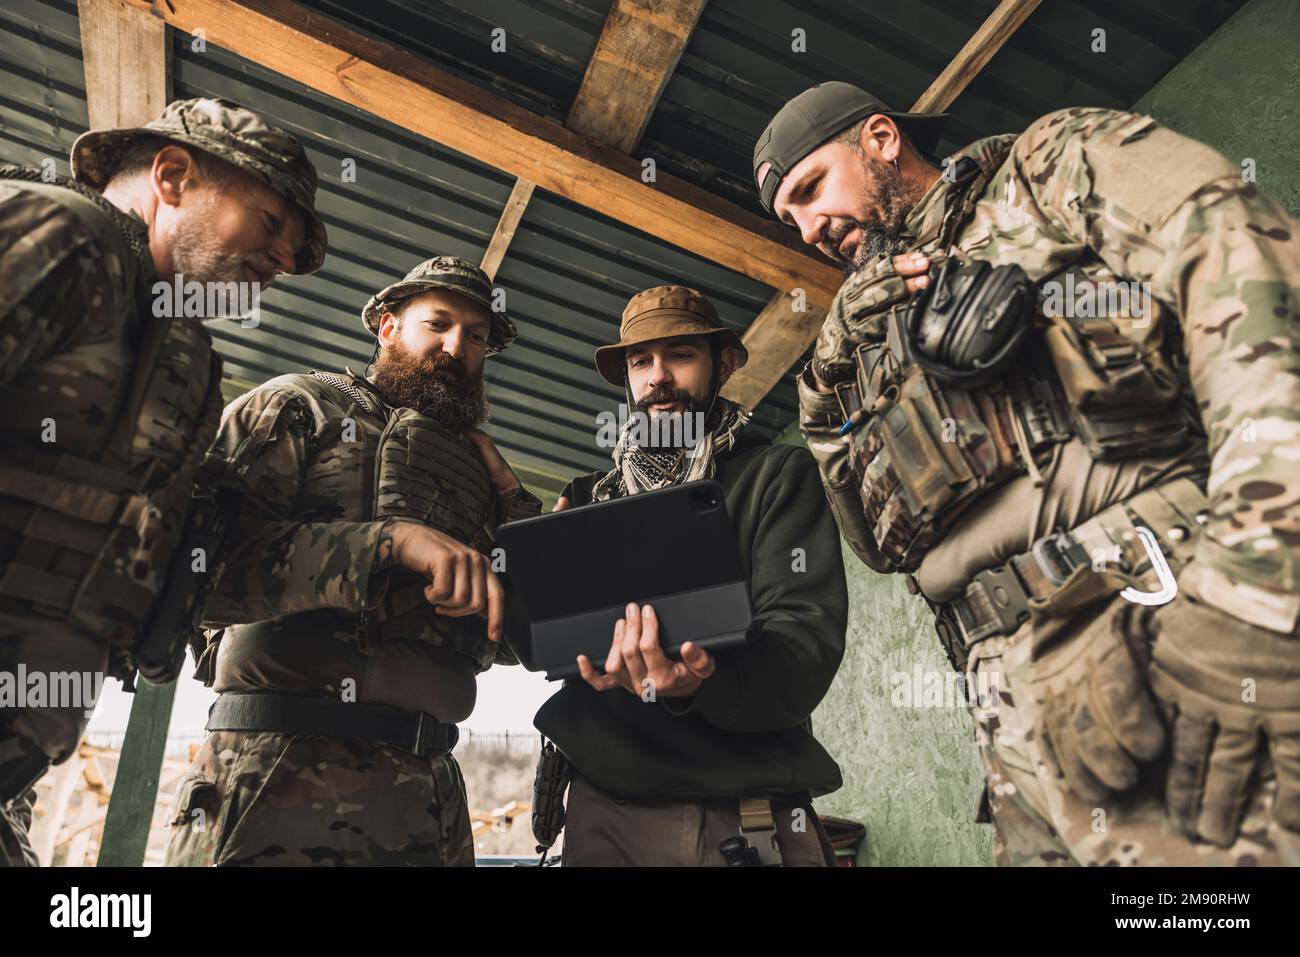 Group of soldiers discussing something before combat Stock Photo